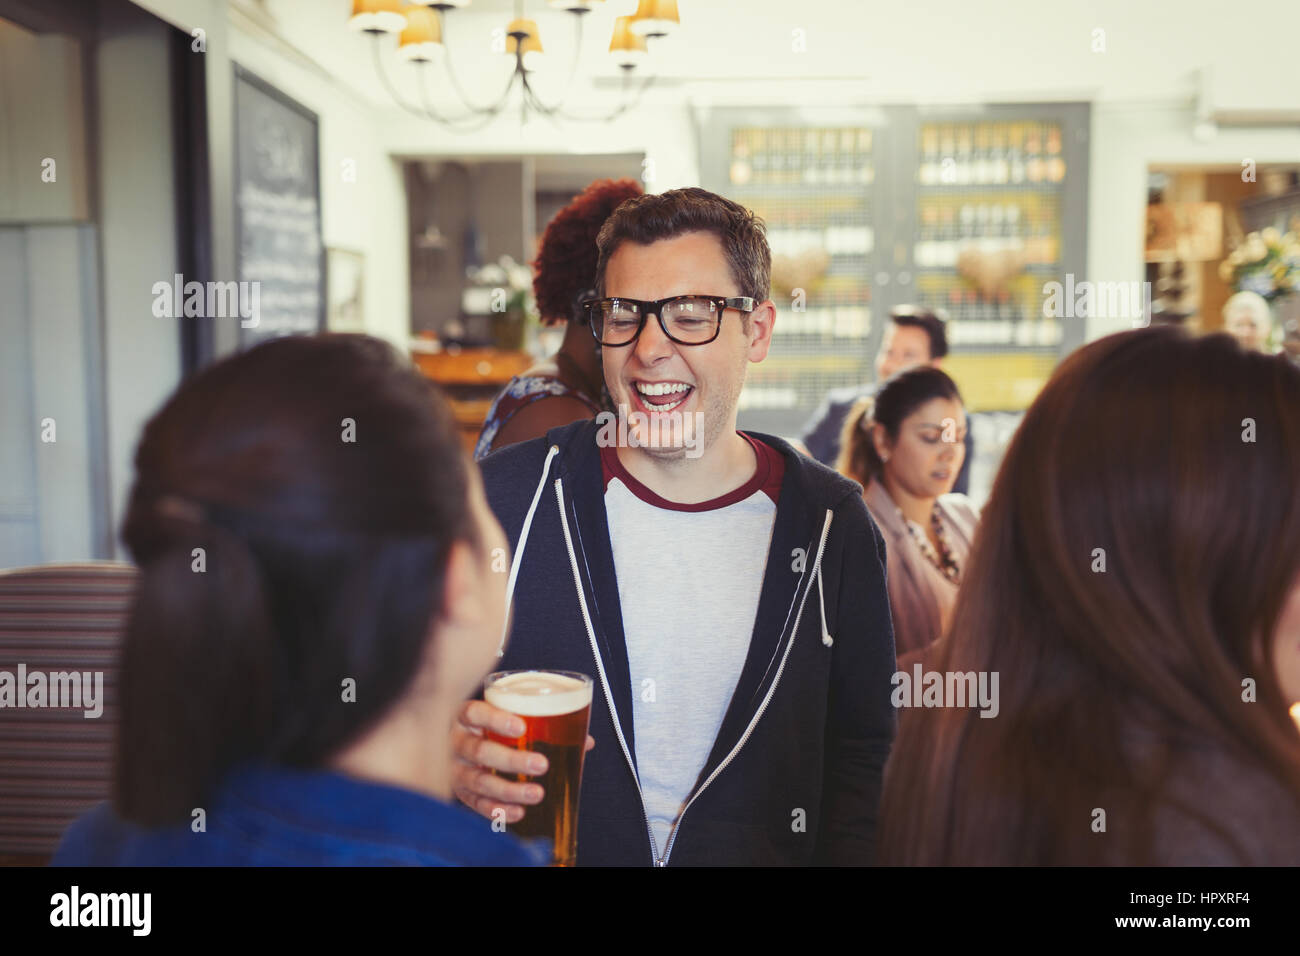 Man laughing and drinking beer with friends at bar Stock Photo